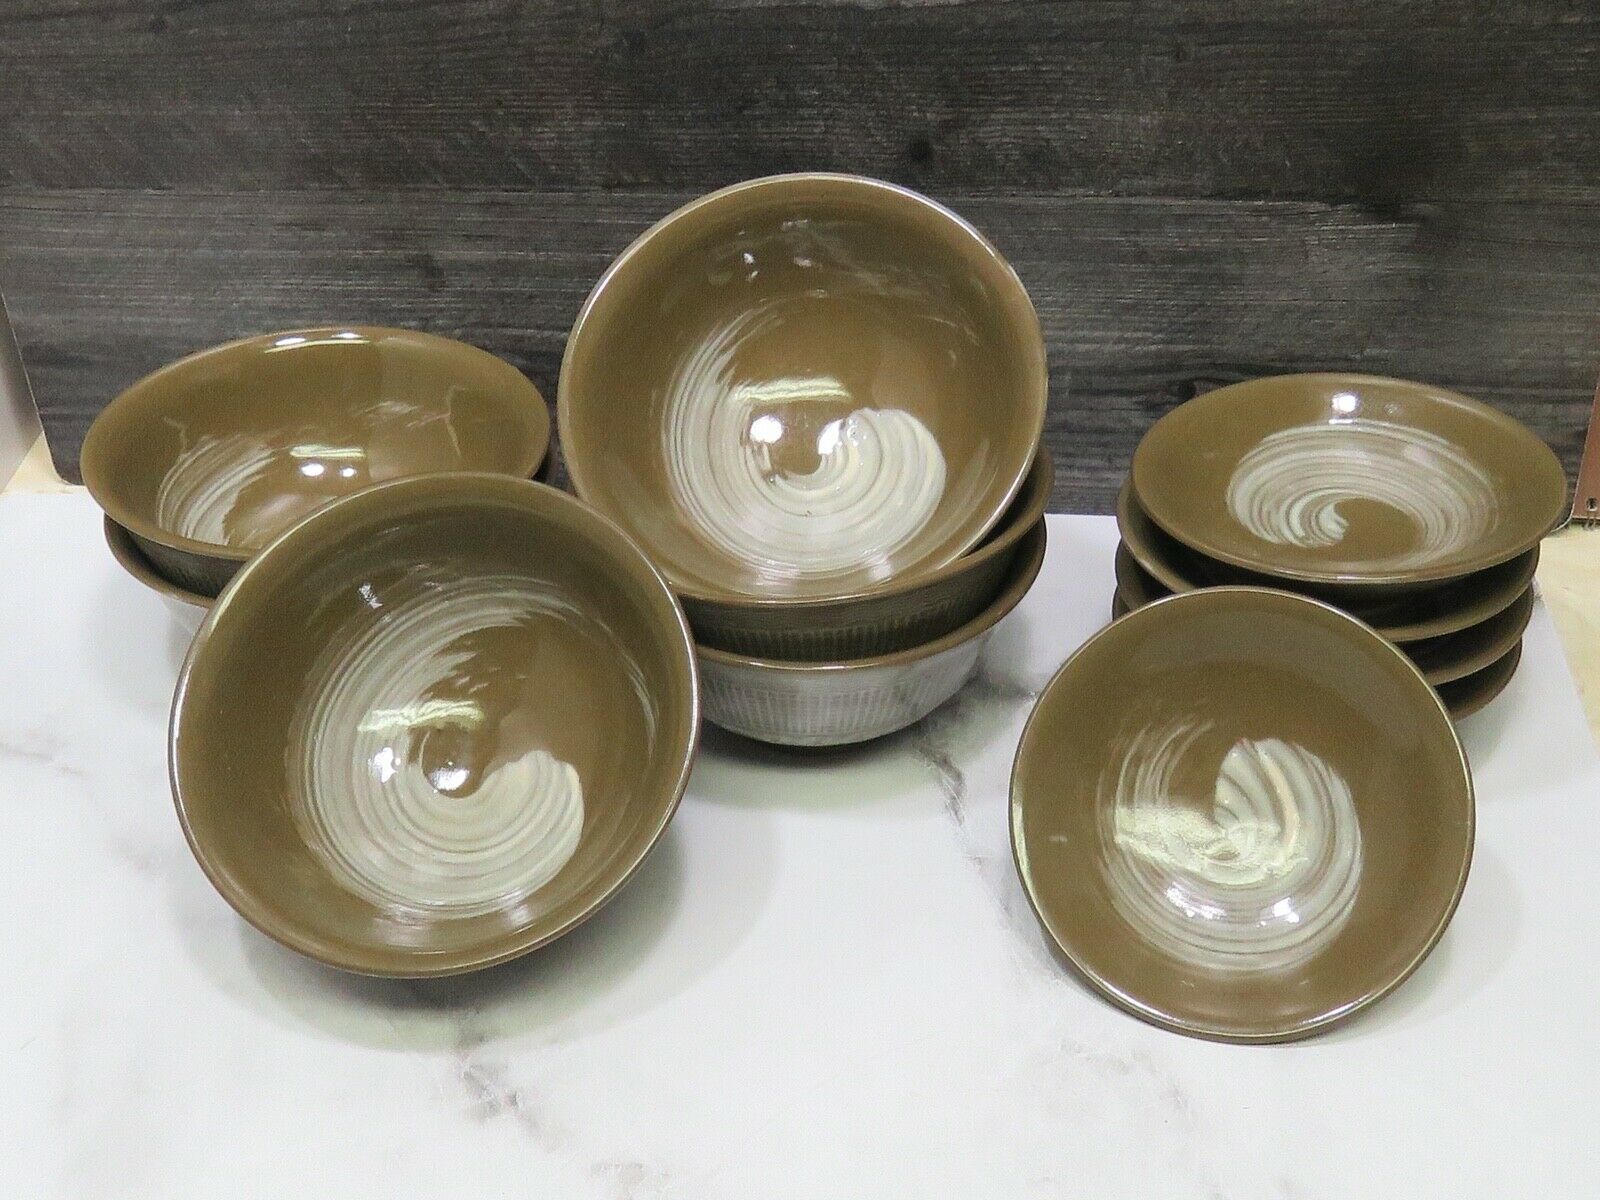 Primary image for Vtg Mid Century Japanese Amthor Imports Pottery Rice Bowls & Sauce Dishes Brown